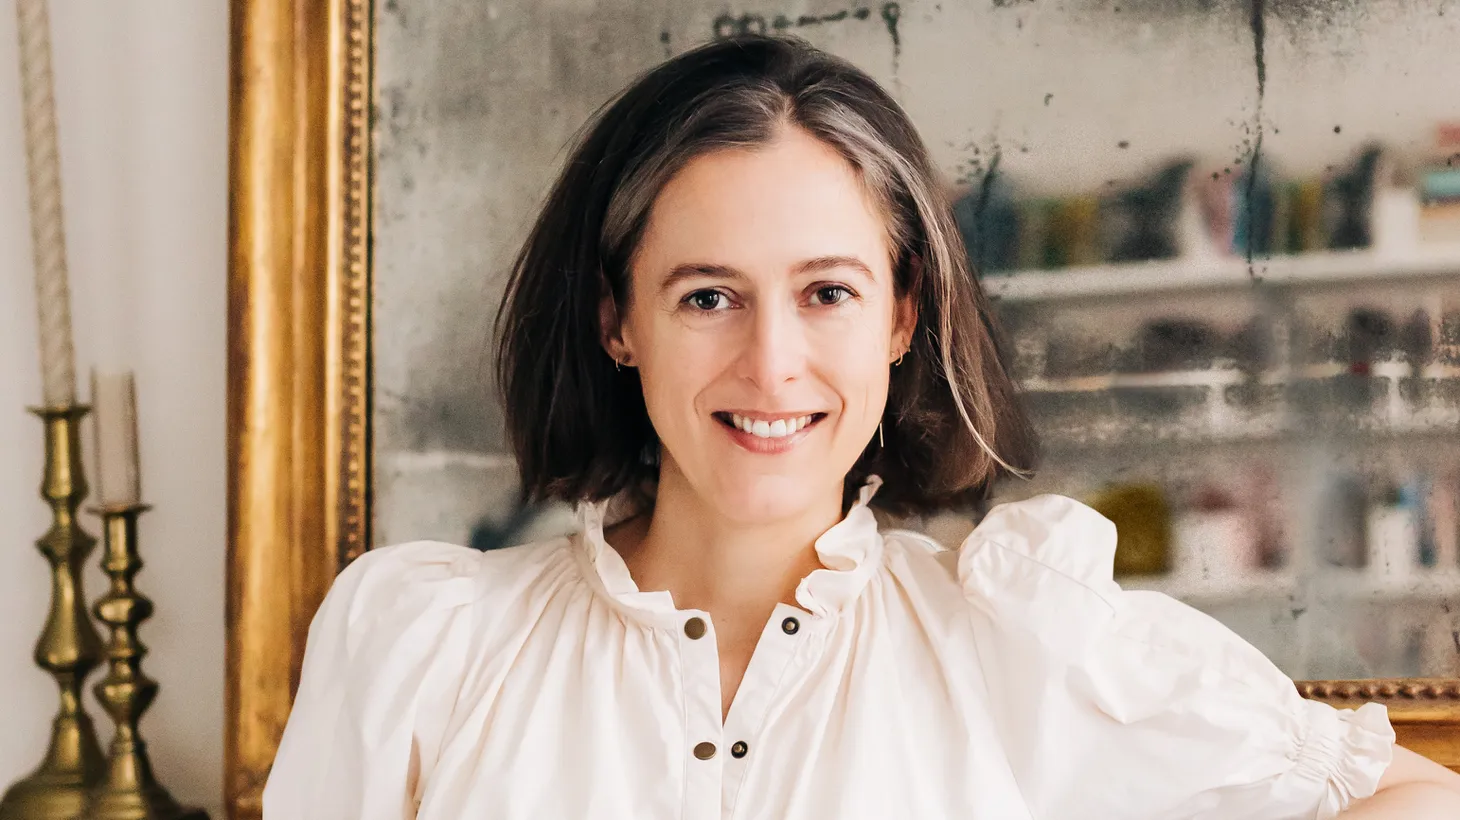 Amanda Hesser is a food writer and editor for the New York Times, where she assembled and edited the latest edition of “The Essential New York Times Cookbook.”